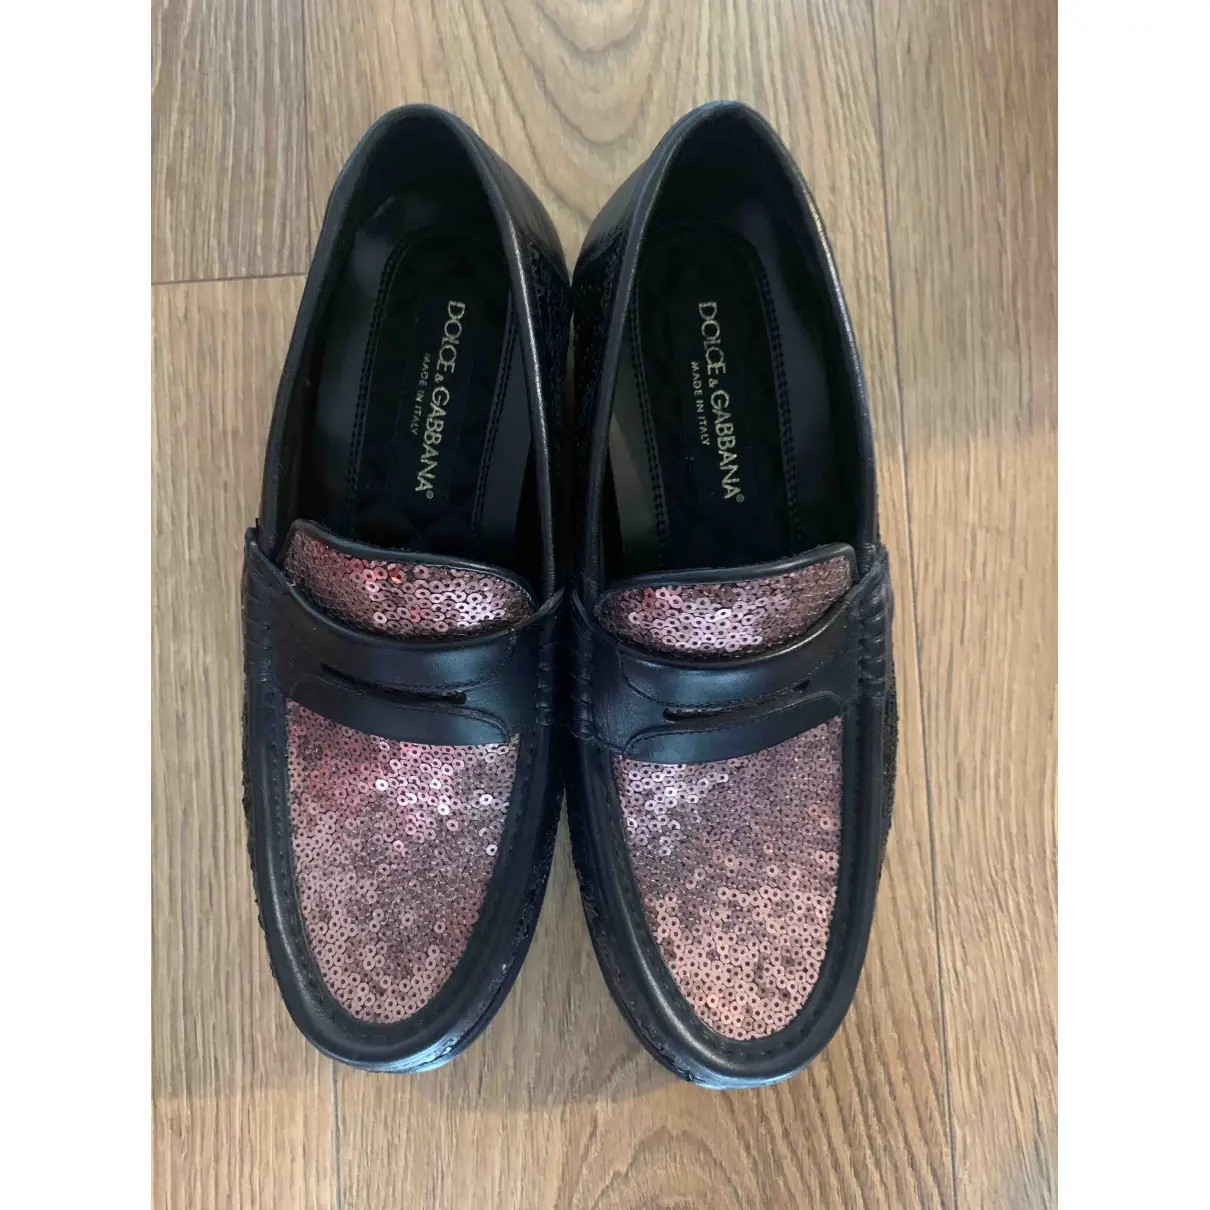 Buy Dolce & Gabbana Leather flats online